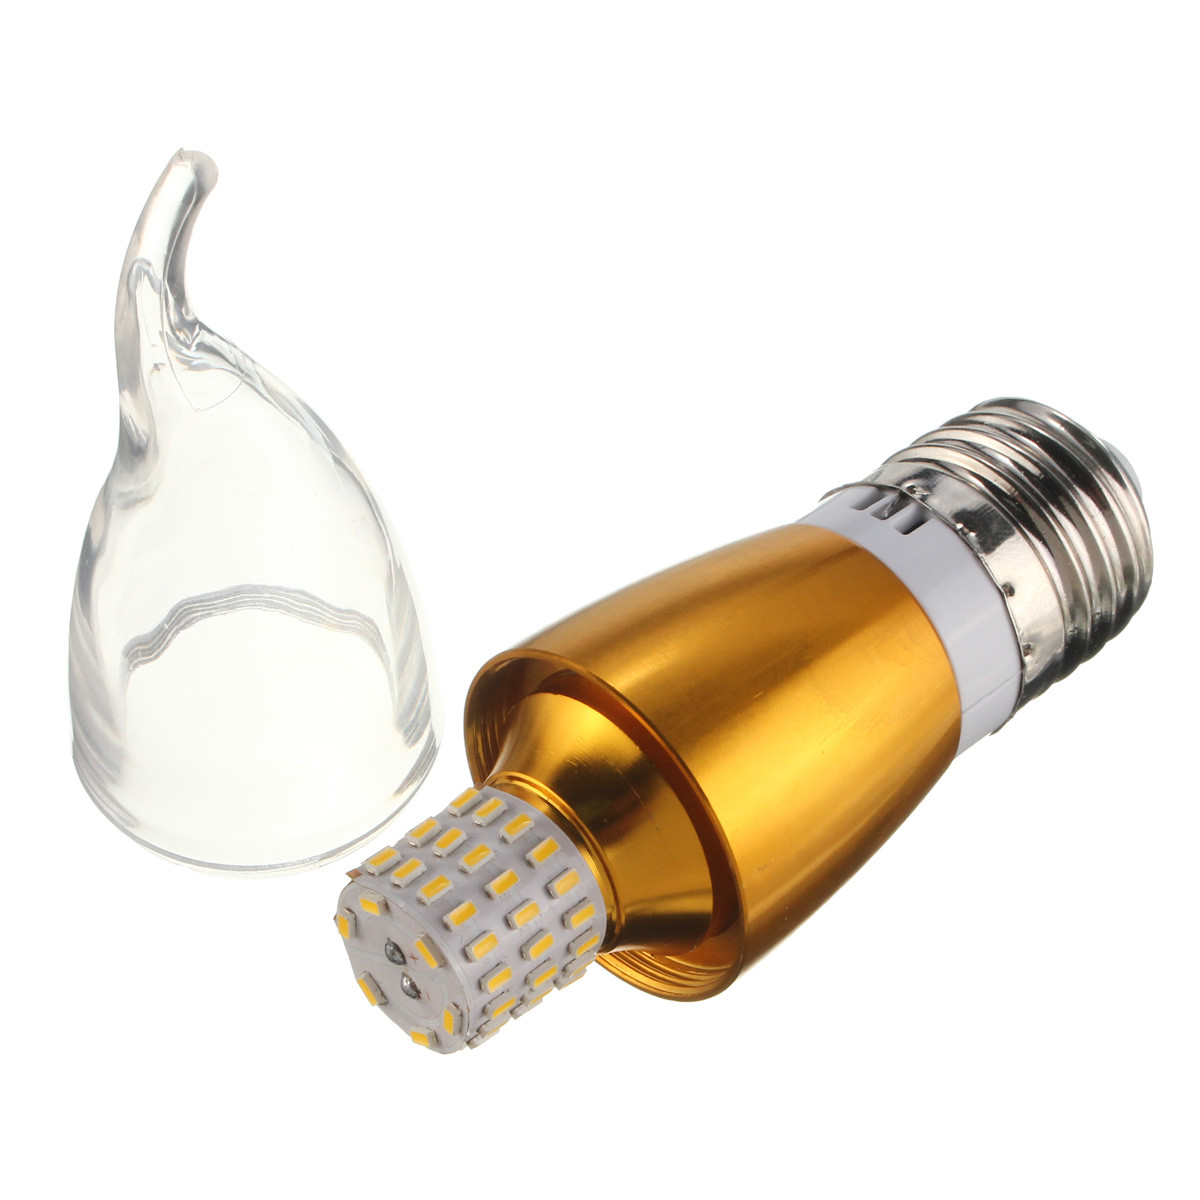 Dimmable-E27-E14-E12-60-SMD-3014-580LM-LED-Candle-Bulb-Golden-Glass-Warm-White-White-Lamp-AC-110V-1041641-5